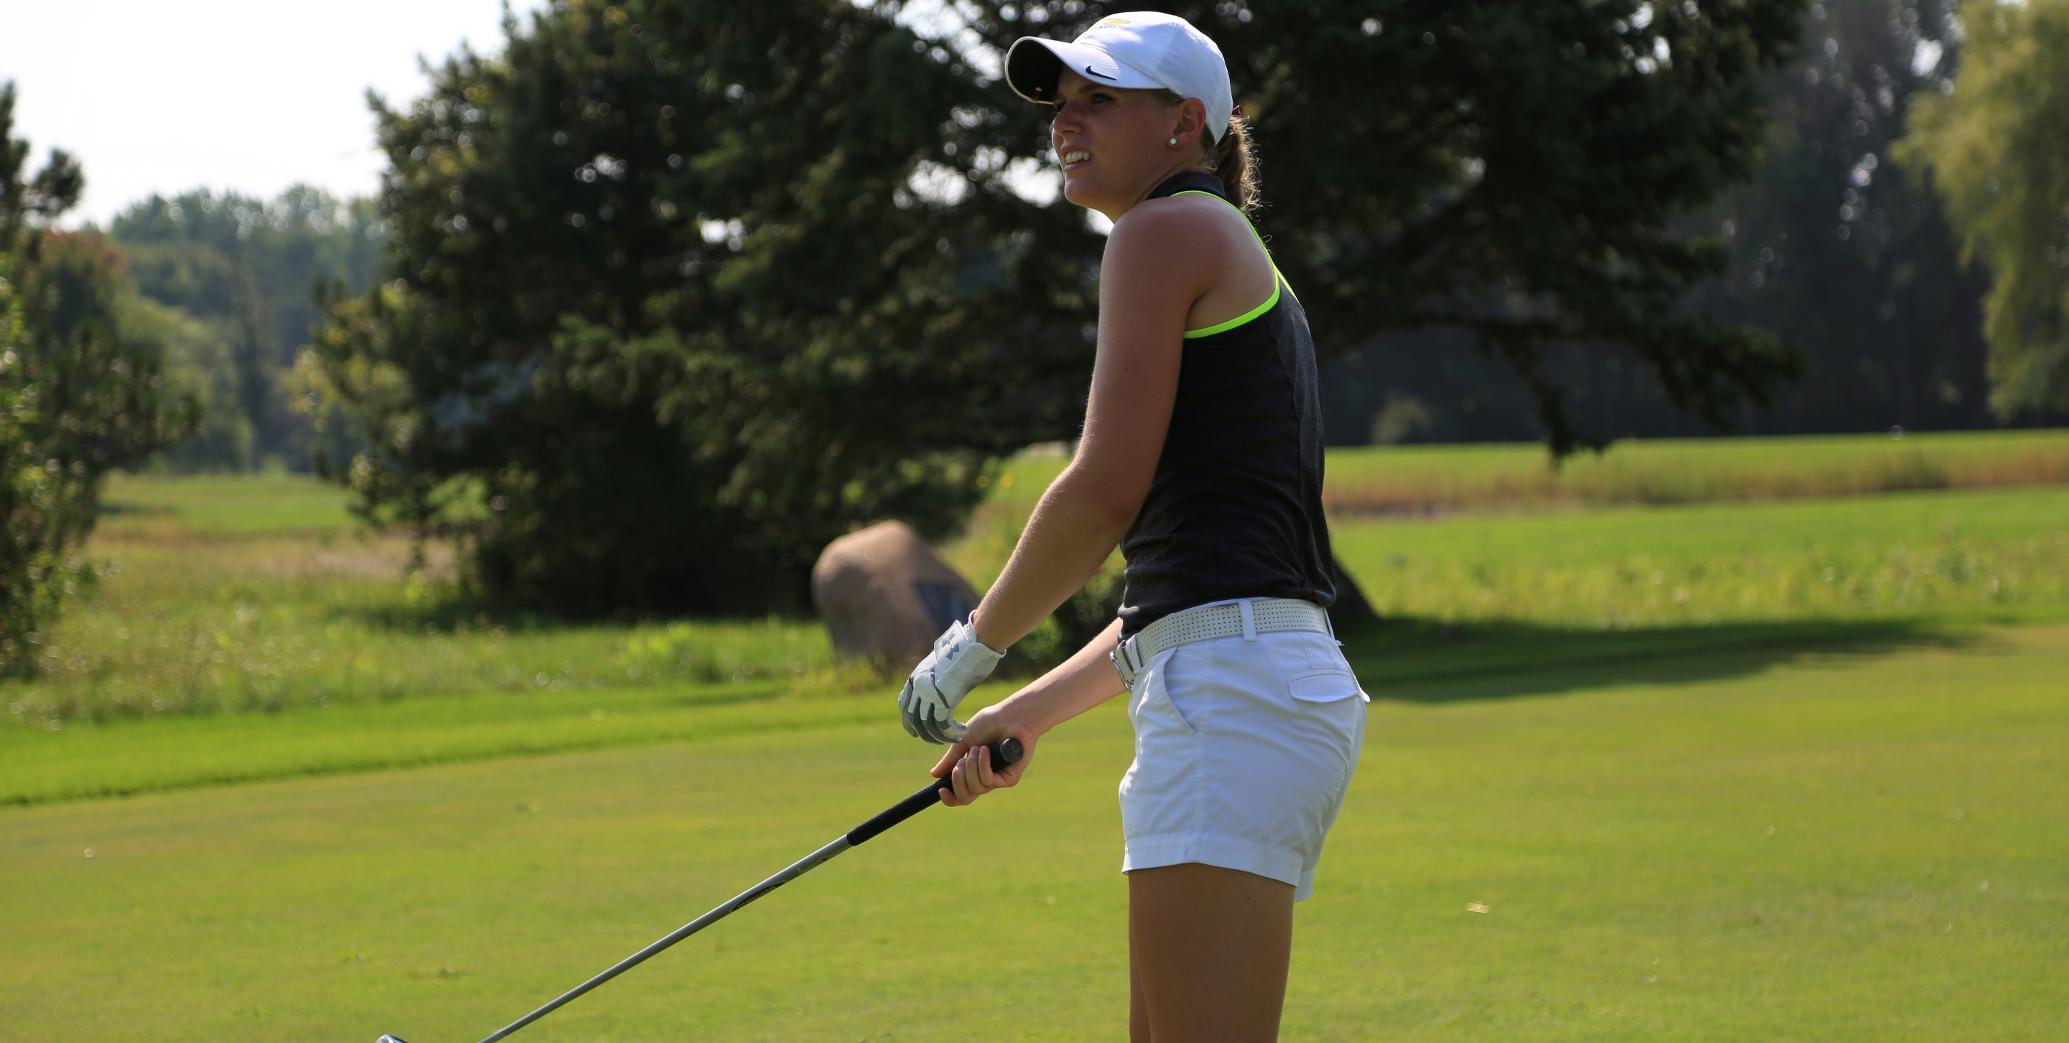 Coffman's 77 leads SVSU on day two at Laker Fall Invite